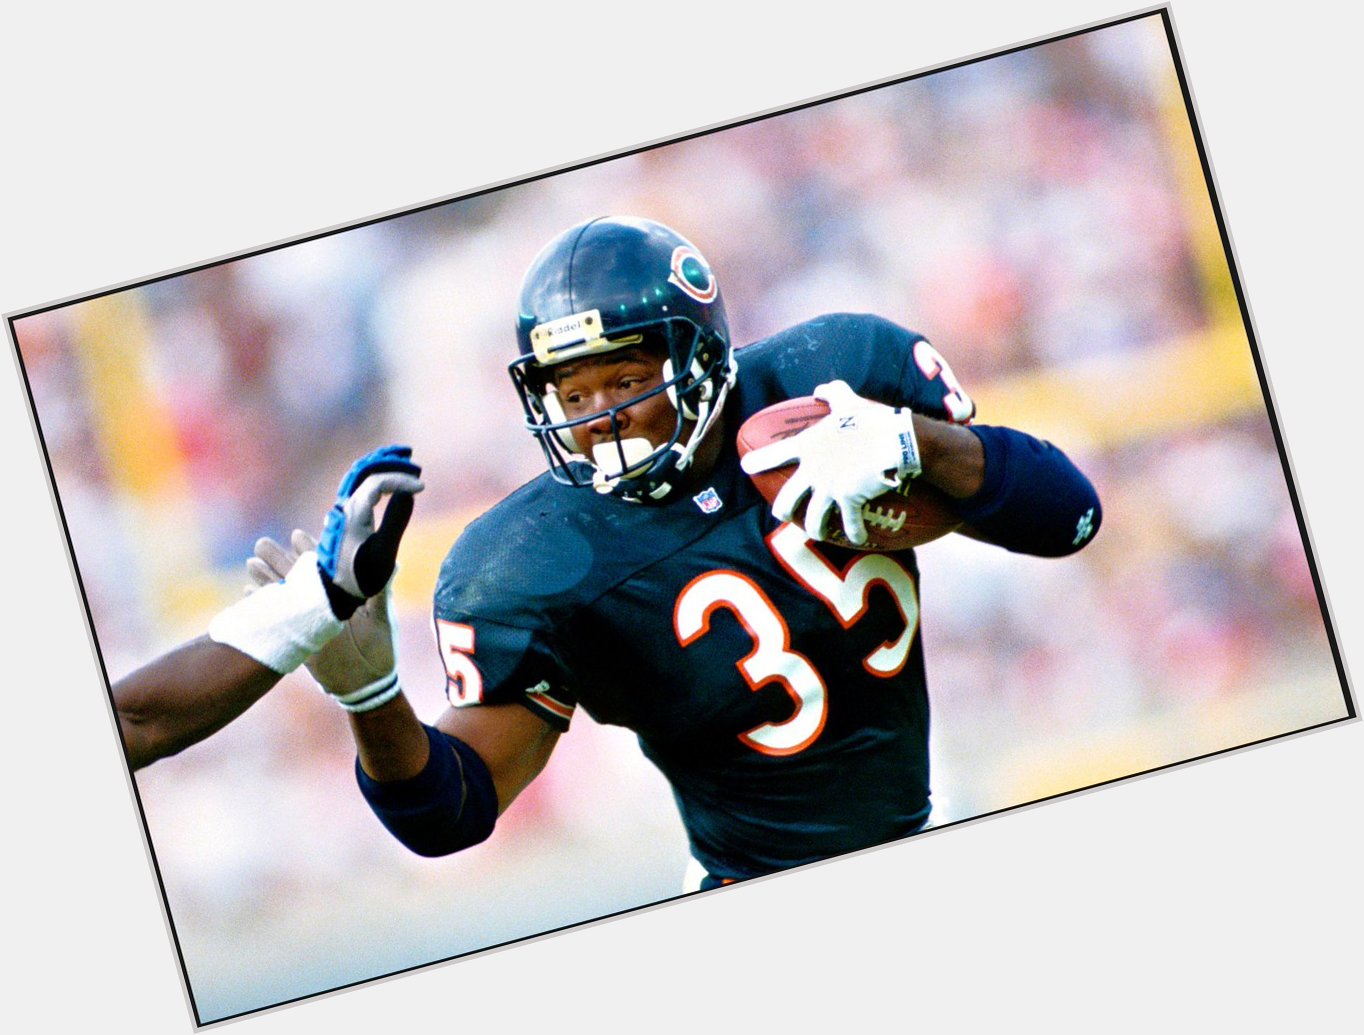 53 years old today. 4X Pro Bowler & 3X 1000 yard rusher in 8 yrs w/ the Bears. Happy birthday to Neal Anderson! 